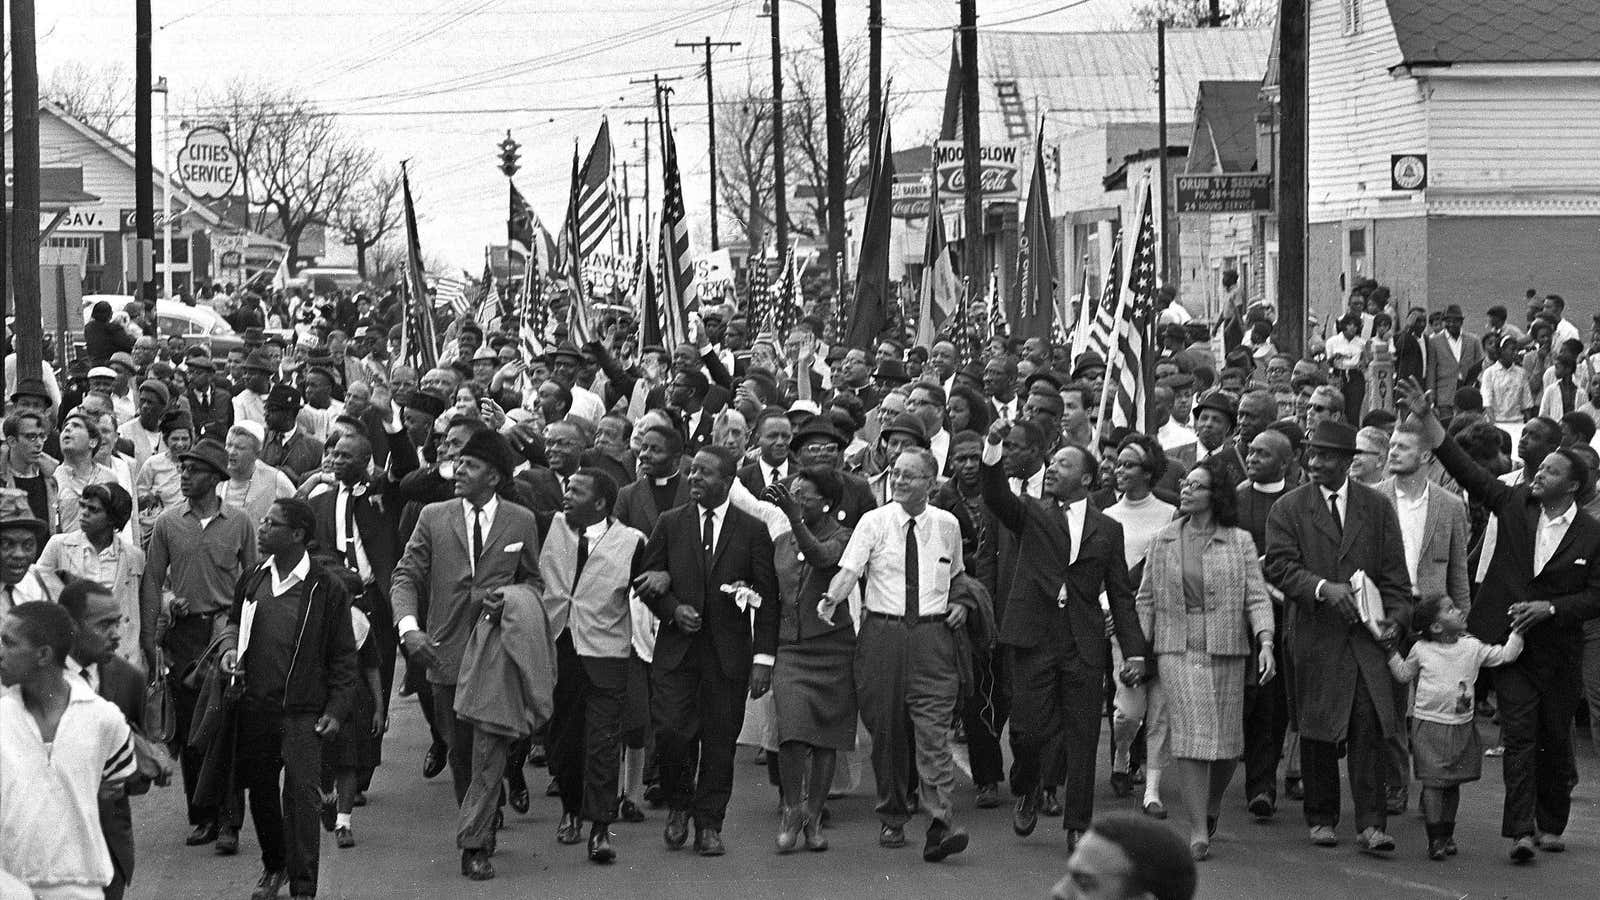 The March 19 civil rights march across the Alabama River, the start of a 50 mile march to Montgomery, Alabama, with Martin Luther King Jr. waving from the front row.